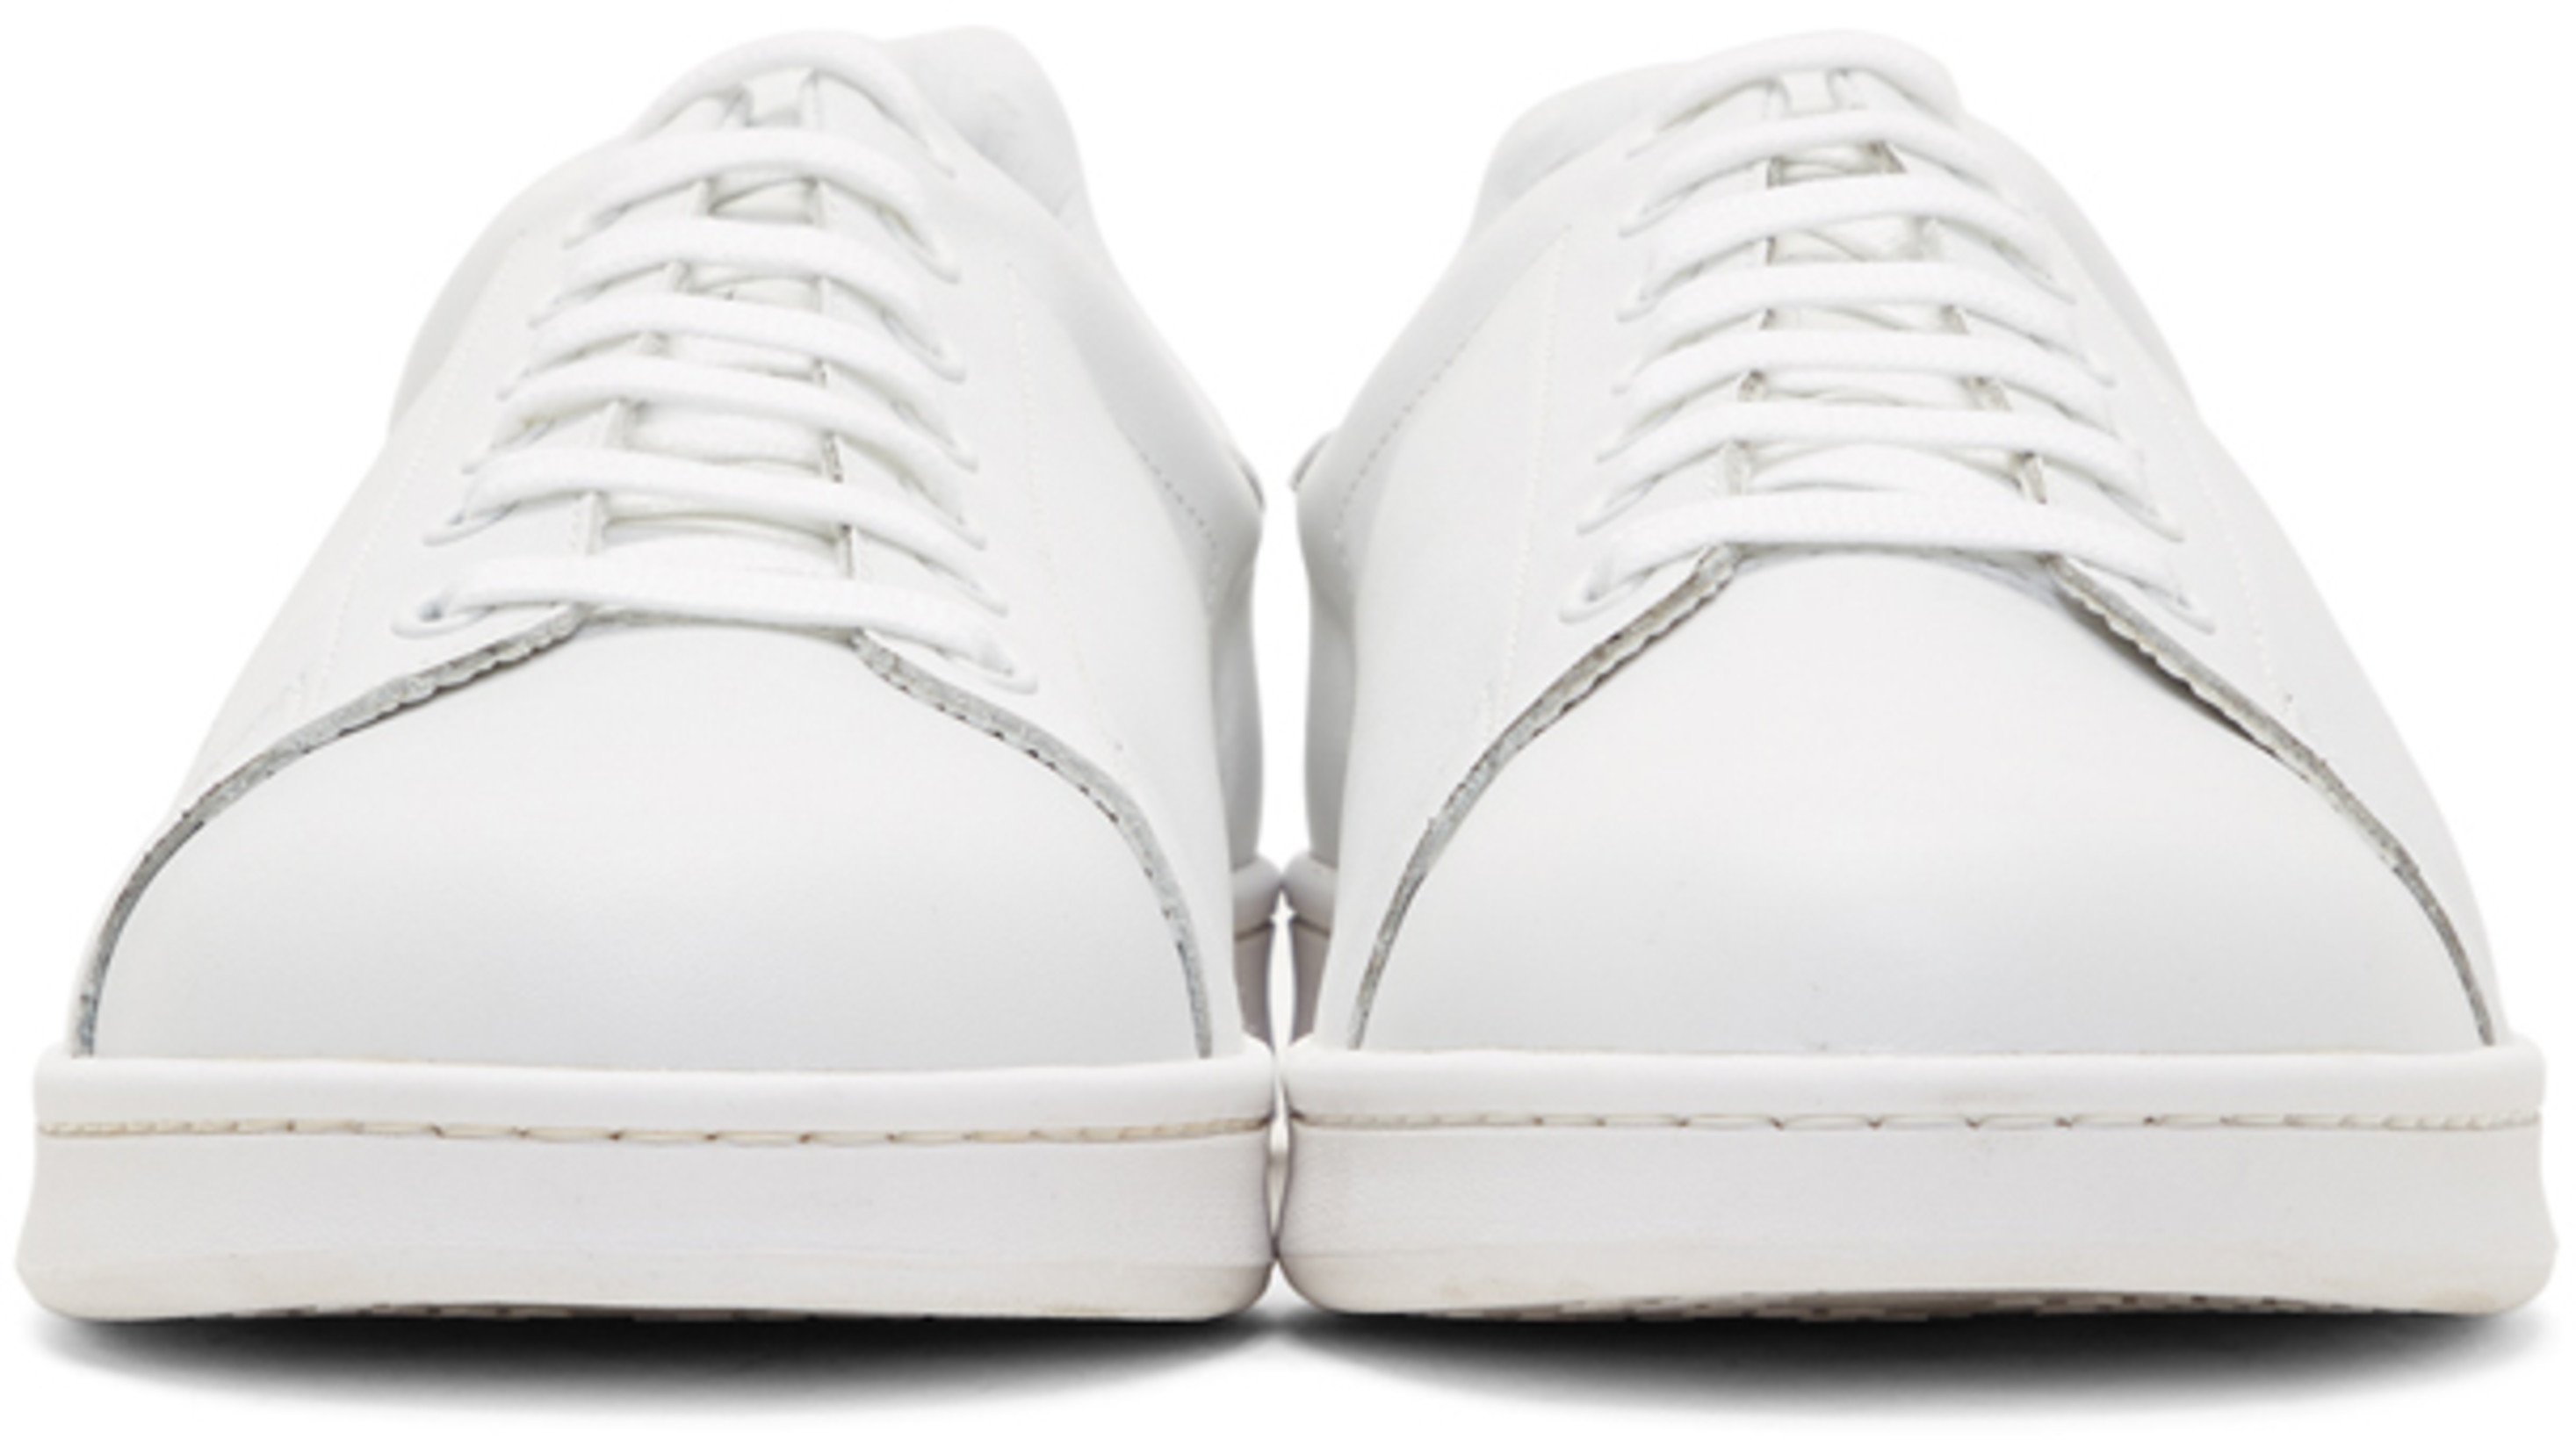 Undercover White "Brainwashed Generation" Sneakers